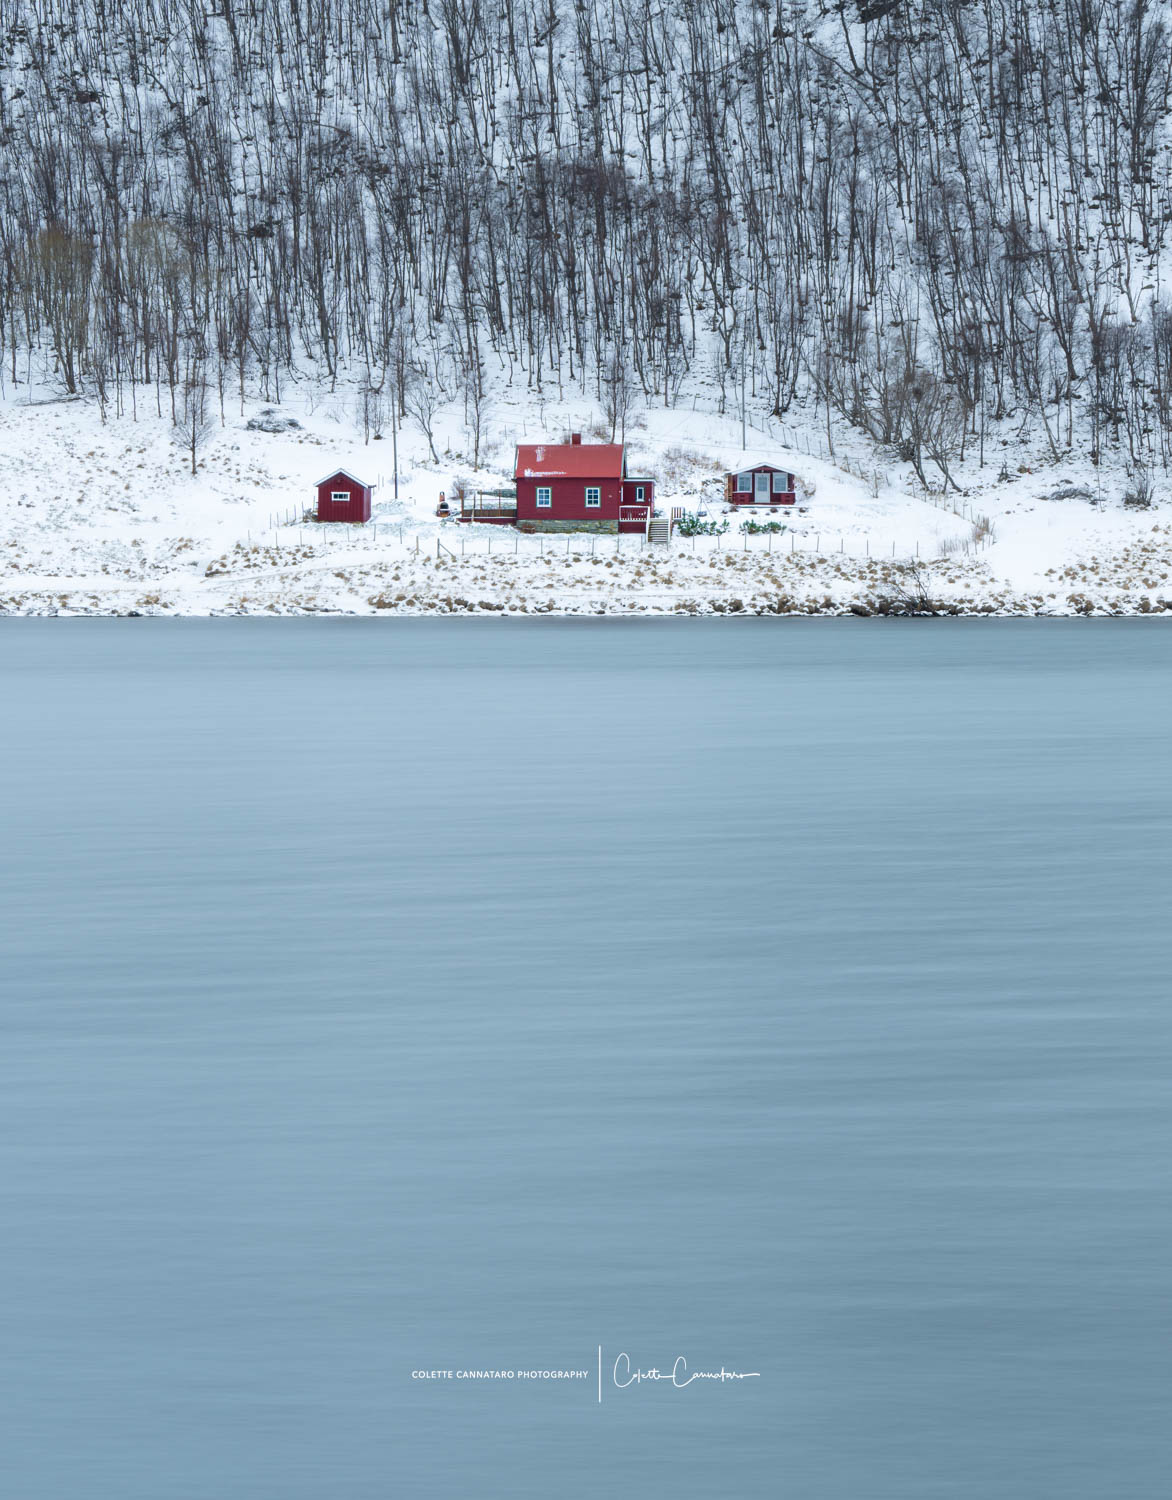 One of Norway's many red cabins along the water.  Long ago, the peasant fishermen needed to protect their wooden cabins and red...